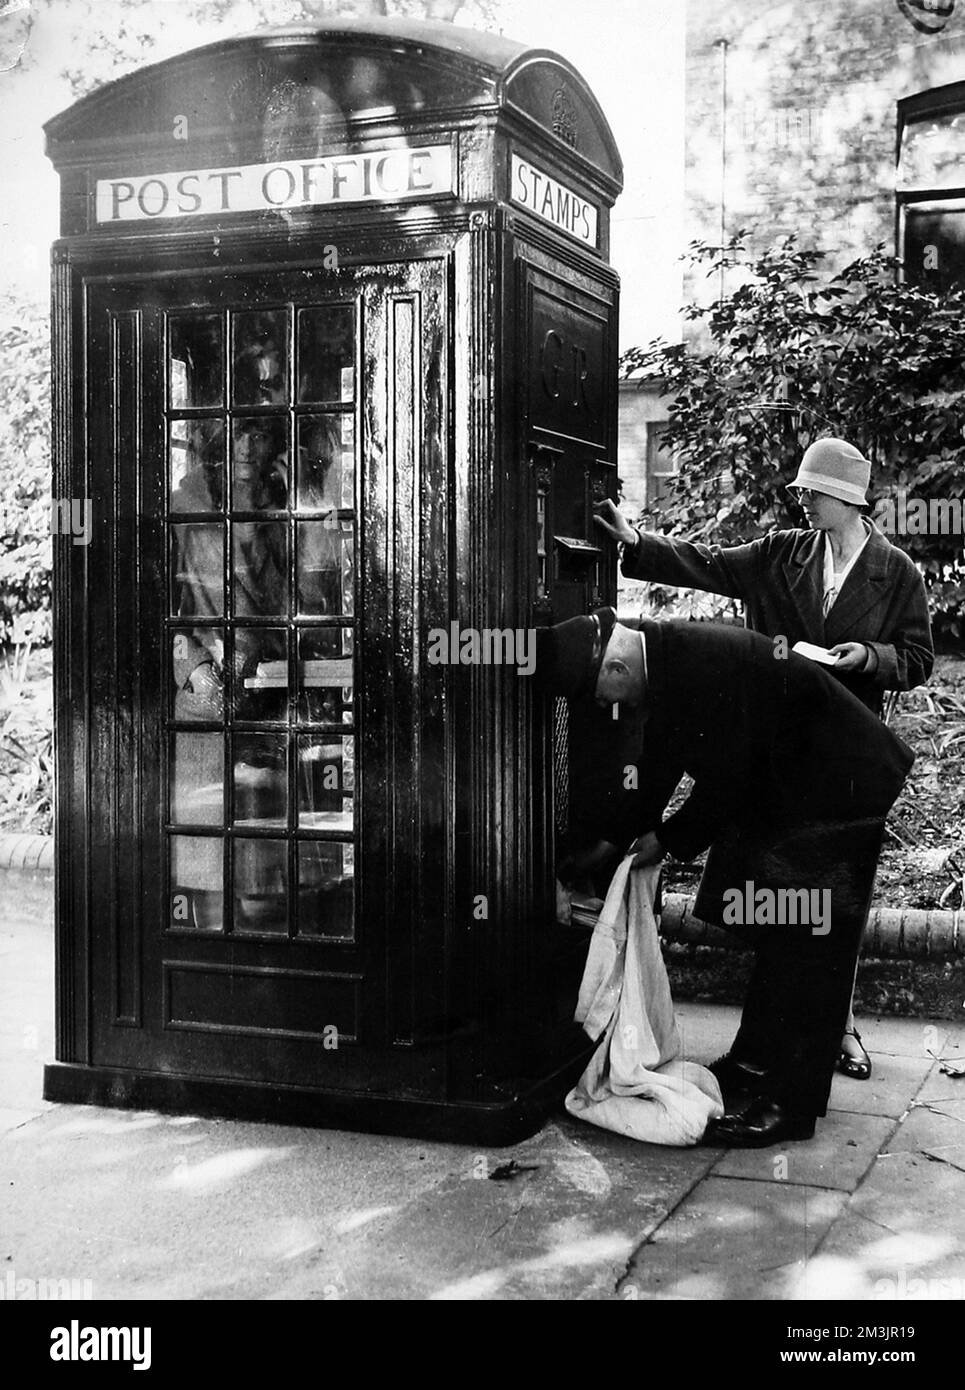 A new telephone kiosk in use in a London street, showing a caller inside, postage stamps being bought from the machine outside, and a postman collecting mail from the letterbox.  1928 Stock Photo